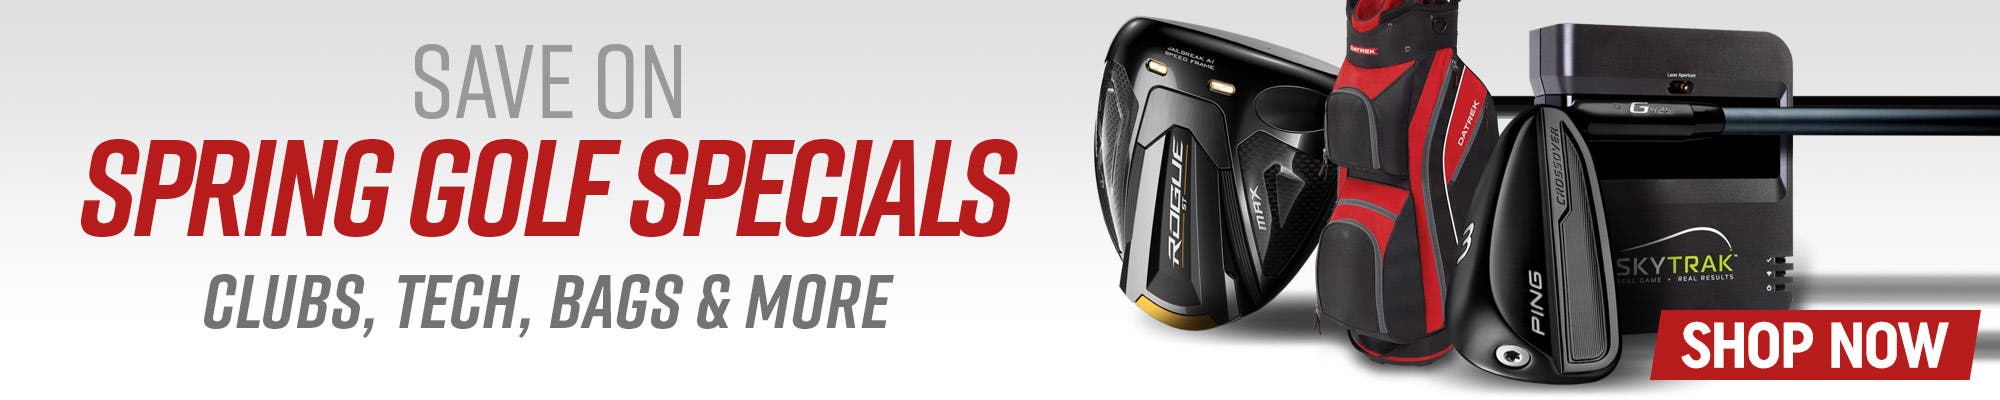 save on spring golf specials | clubs, tech, bags and more | shop now